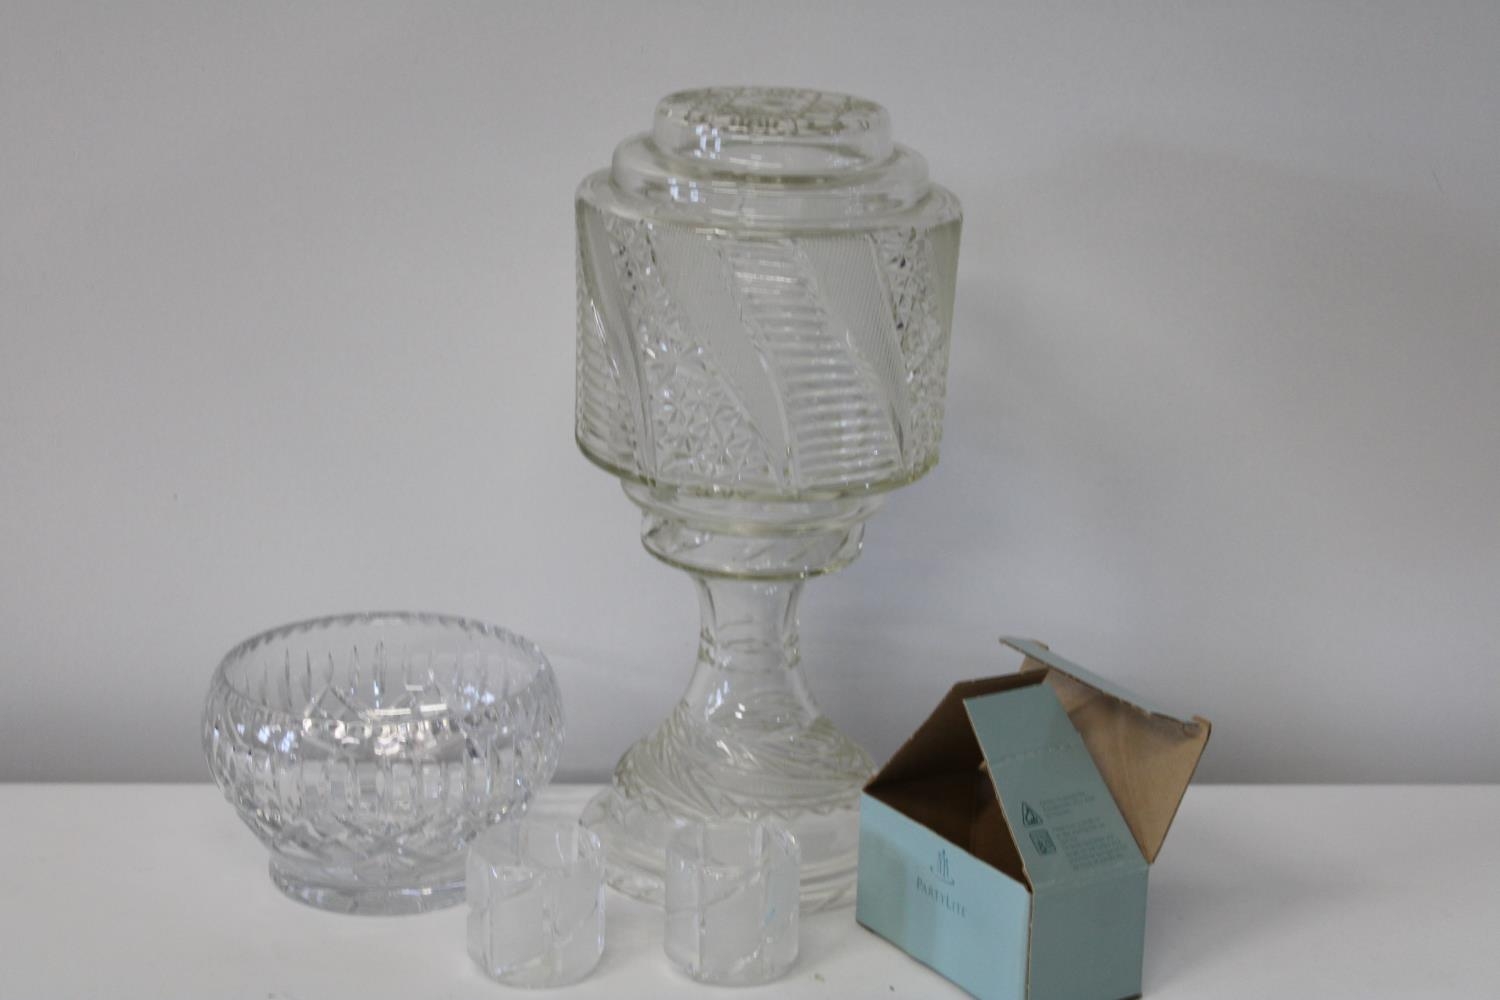 A Hurricane style glass lamp & other glass items (lamp has chips to the base)